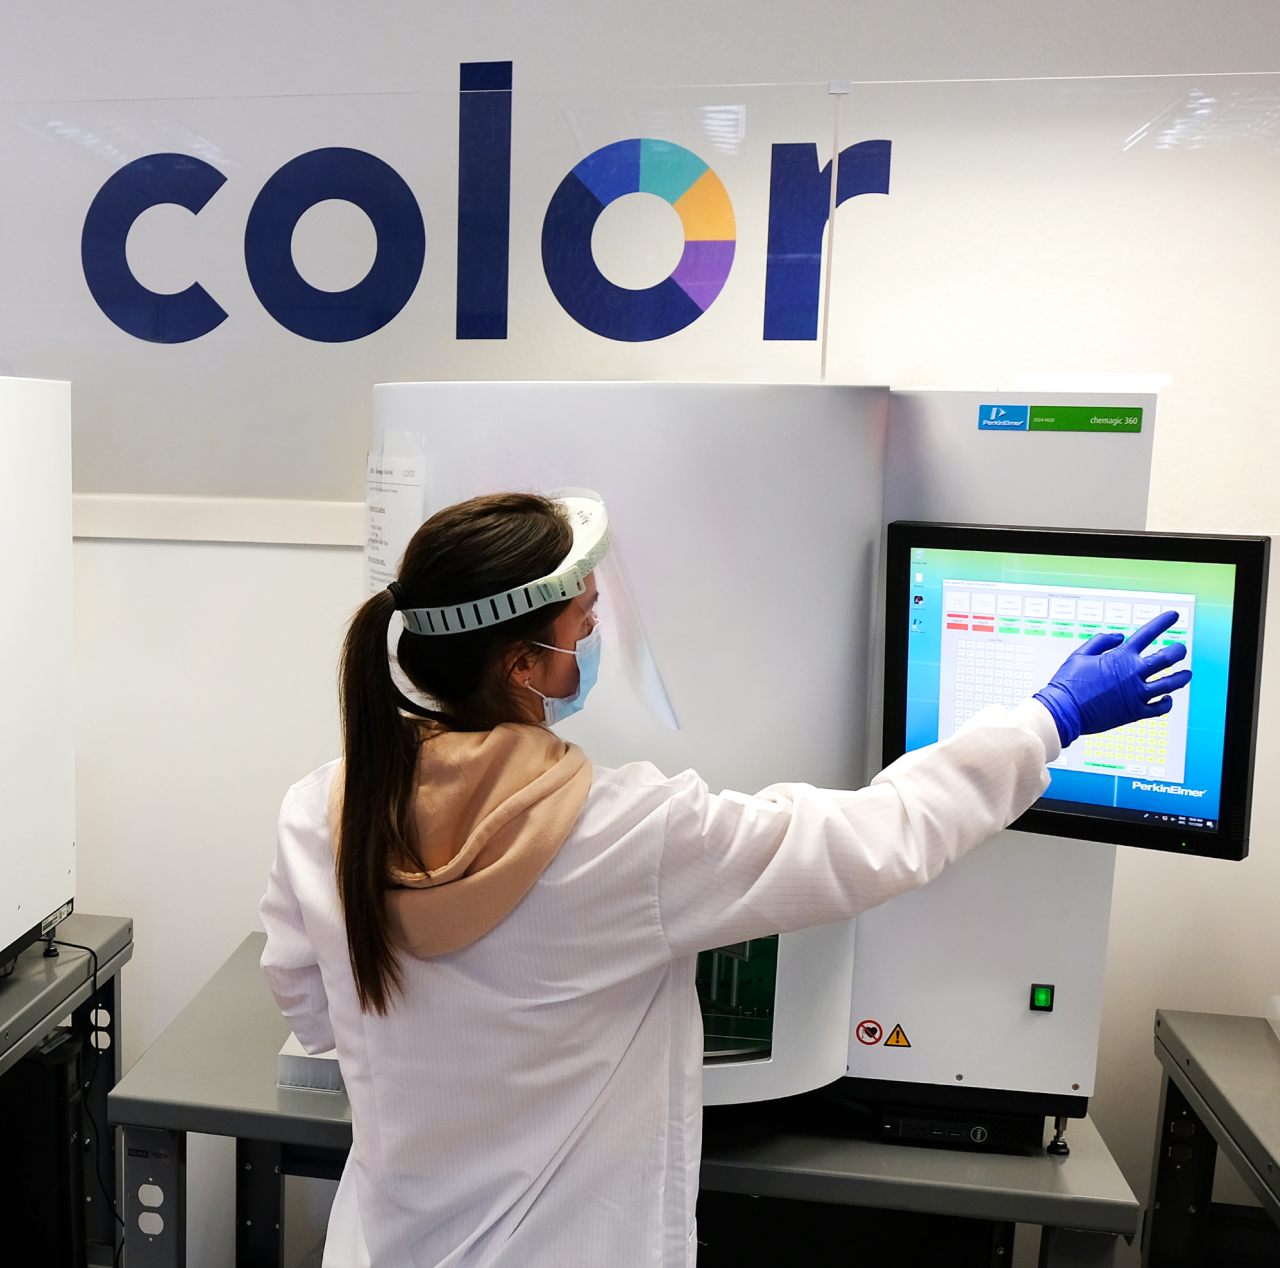 Woman wearing a lab coat and face shield pressing a screen while standing under a Color sign on the wall